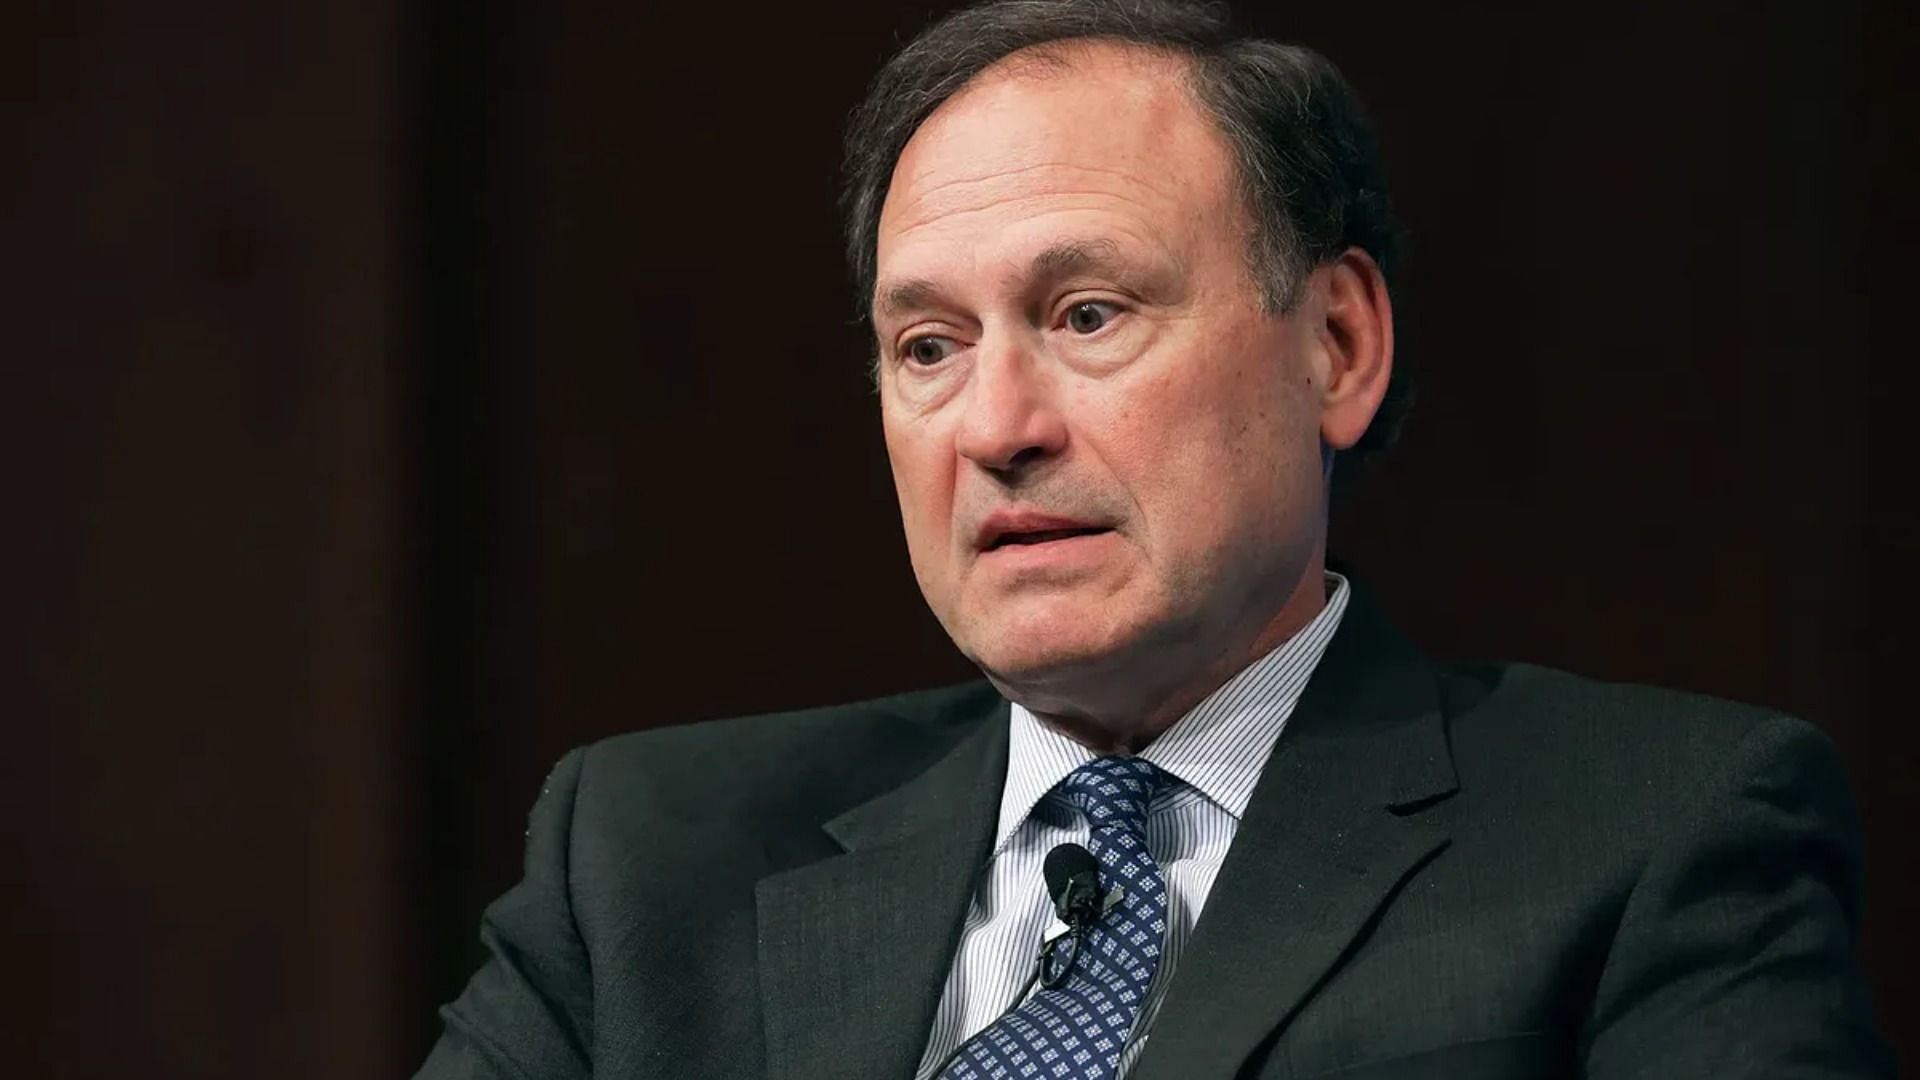 Samuel Alito was elected by former President George R. Bush to the court to replace the seat left vacant by Sandra Day O&#039;Connor. (Image via Getty Images/Chip Somodevilla)